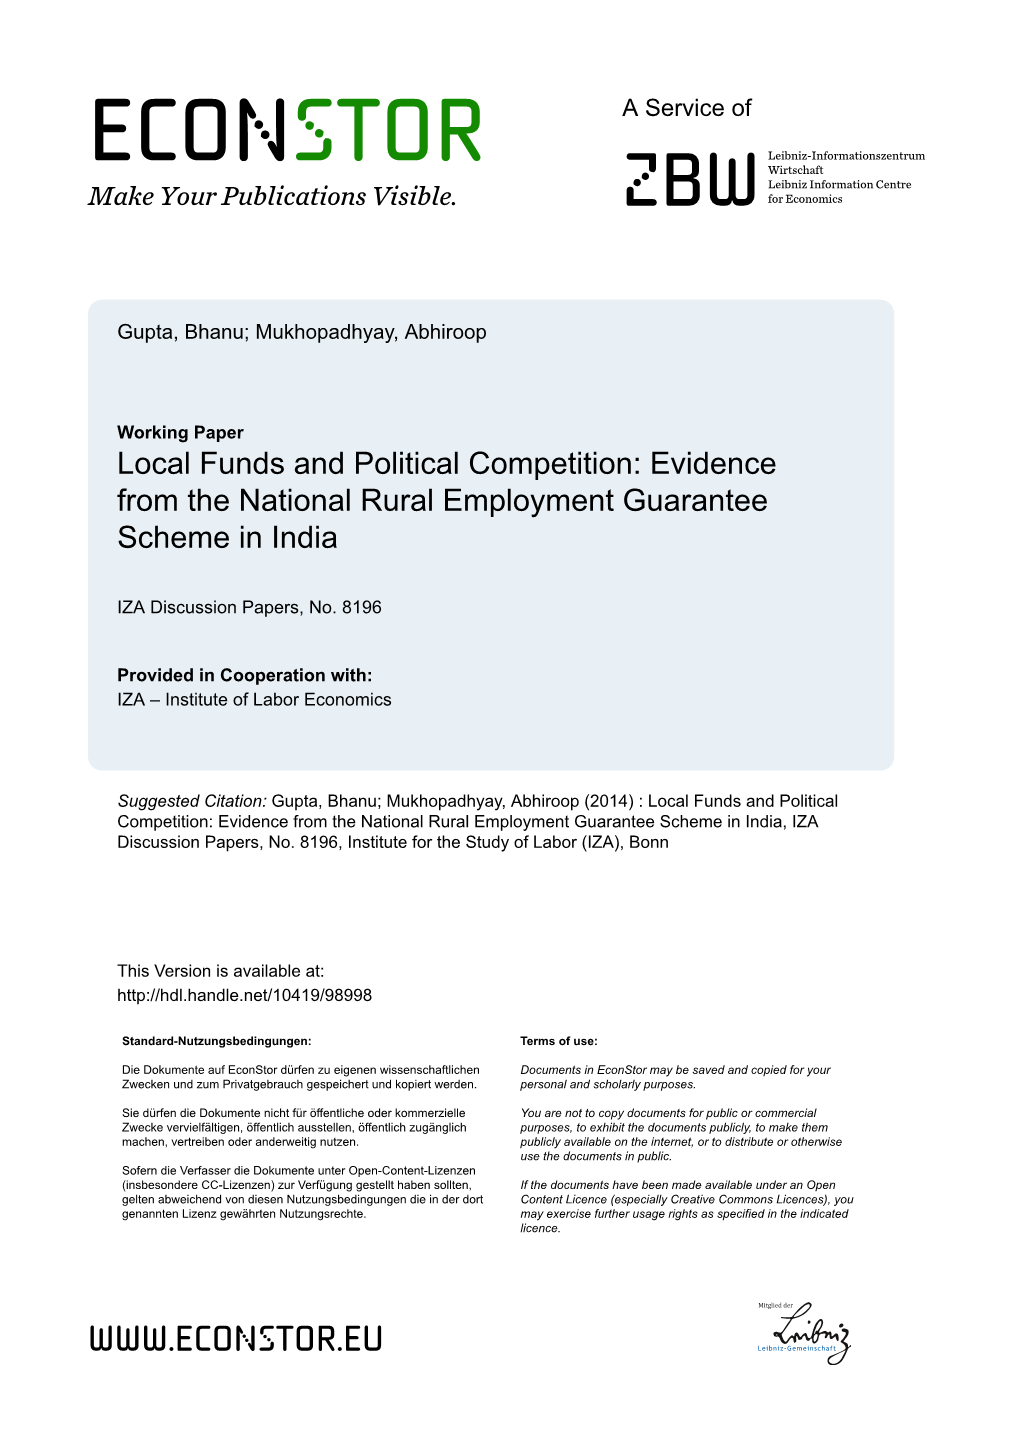 Local Funds and Political Competition: Evidence from the National Rural Employment Guarantee Scheme in India